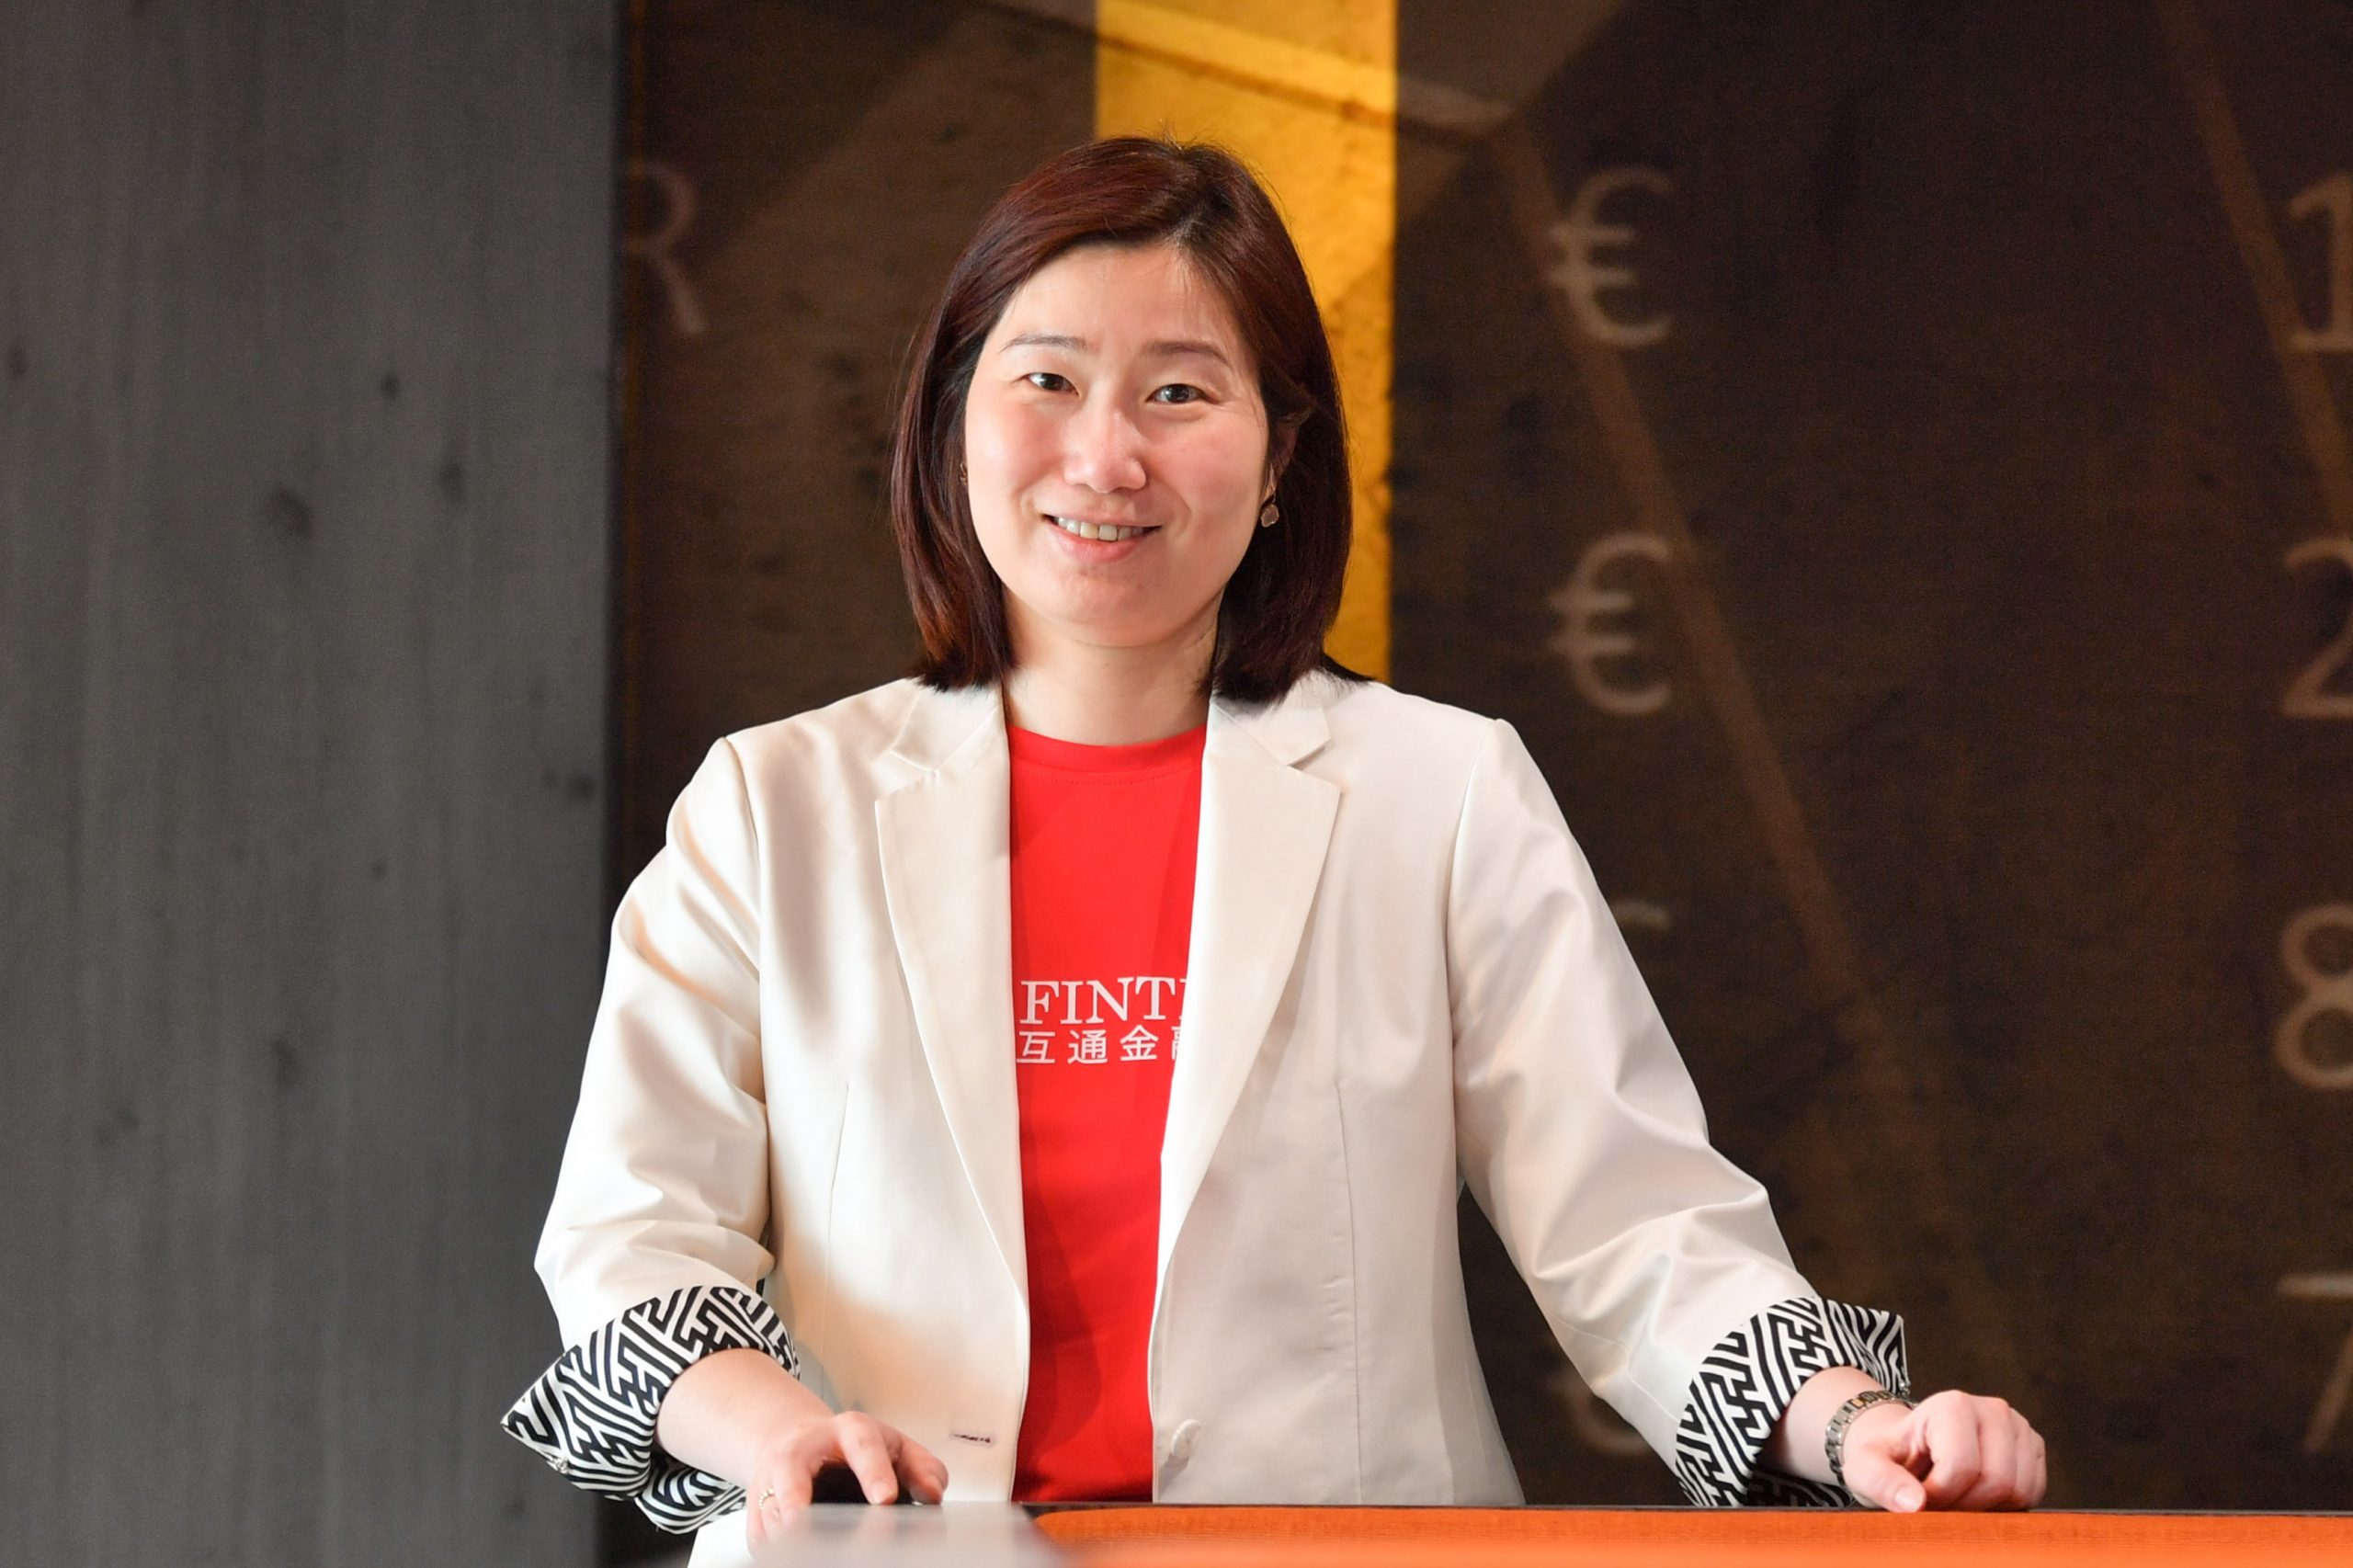 Irene Wong - The FinTech icon giving back to society